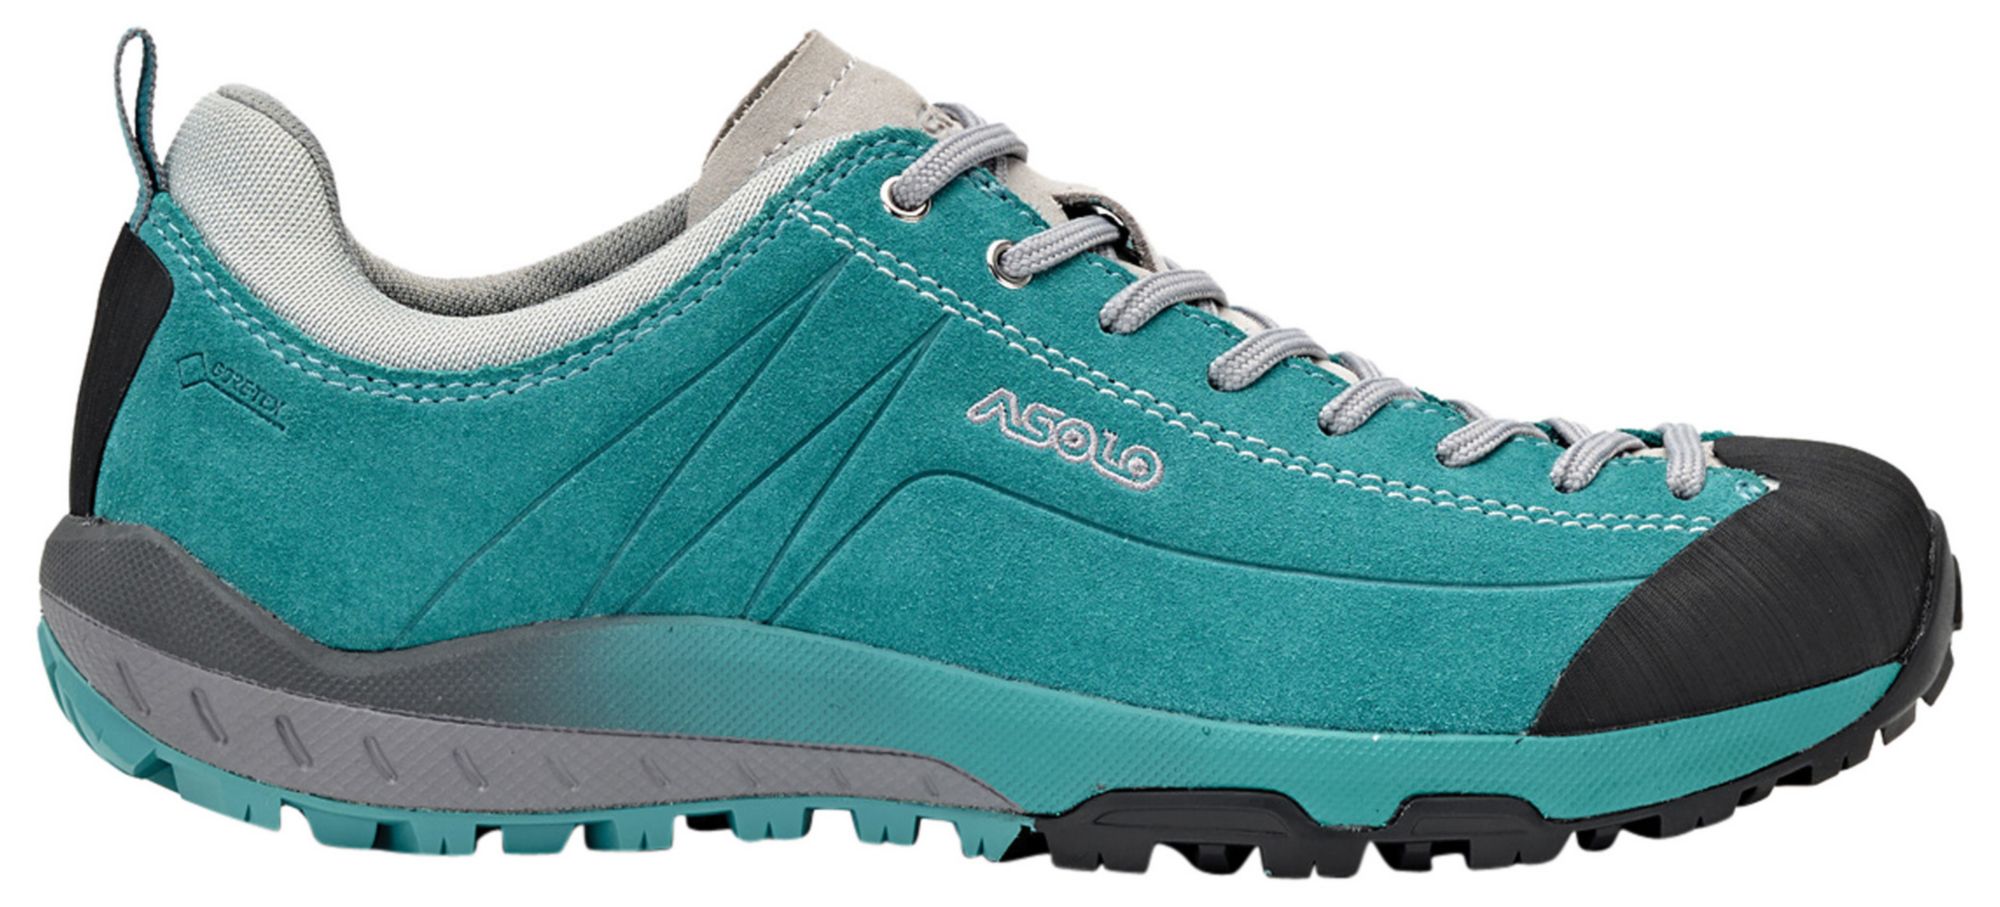 Photos - Trekking Shoes ASOLO Women's Space GV Waterproof Hiking Shoes, Size 7.5, North Sea 23QHGW 